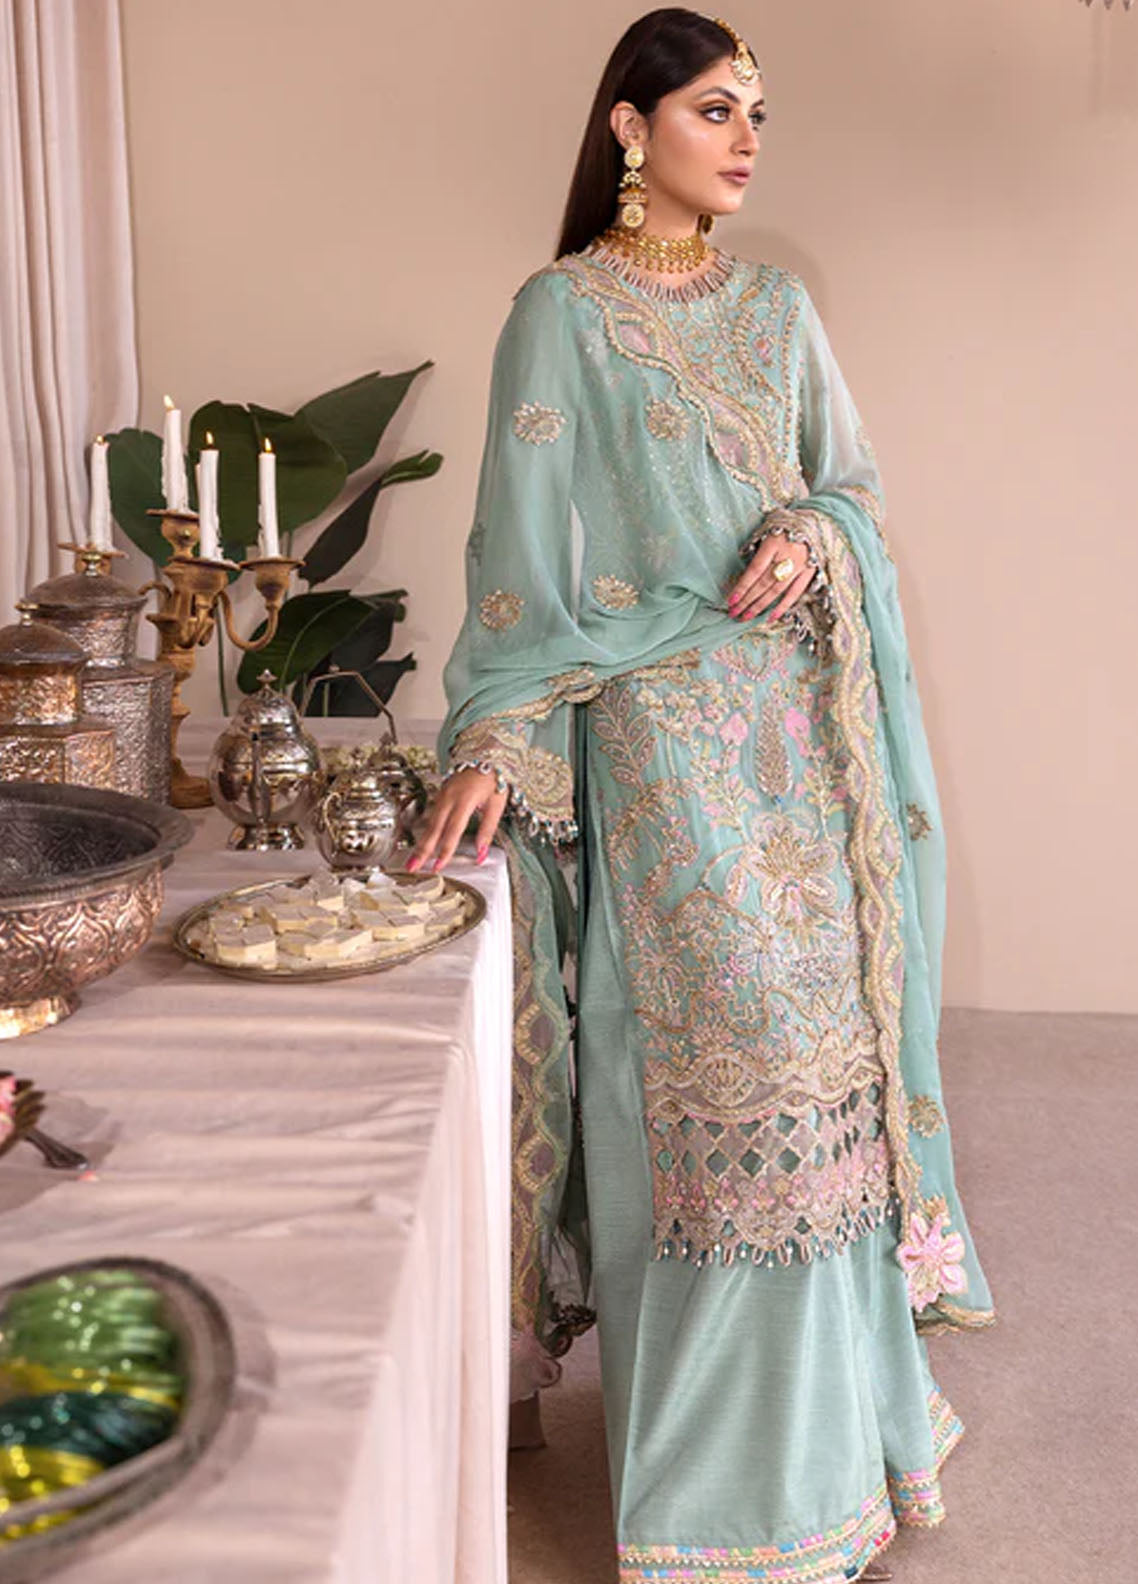 Romansiyyah By Emaan Adeel Luxury Formals Collection 2023 Dalilah